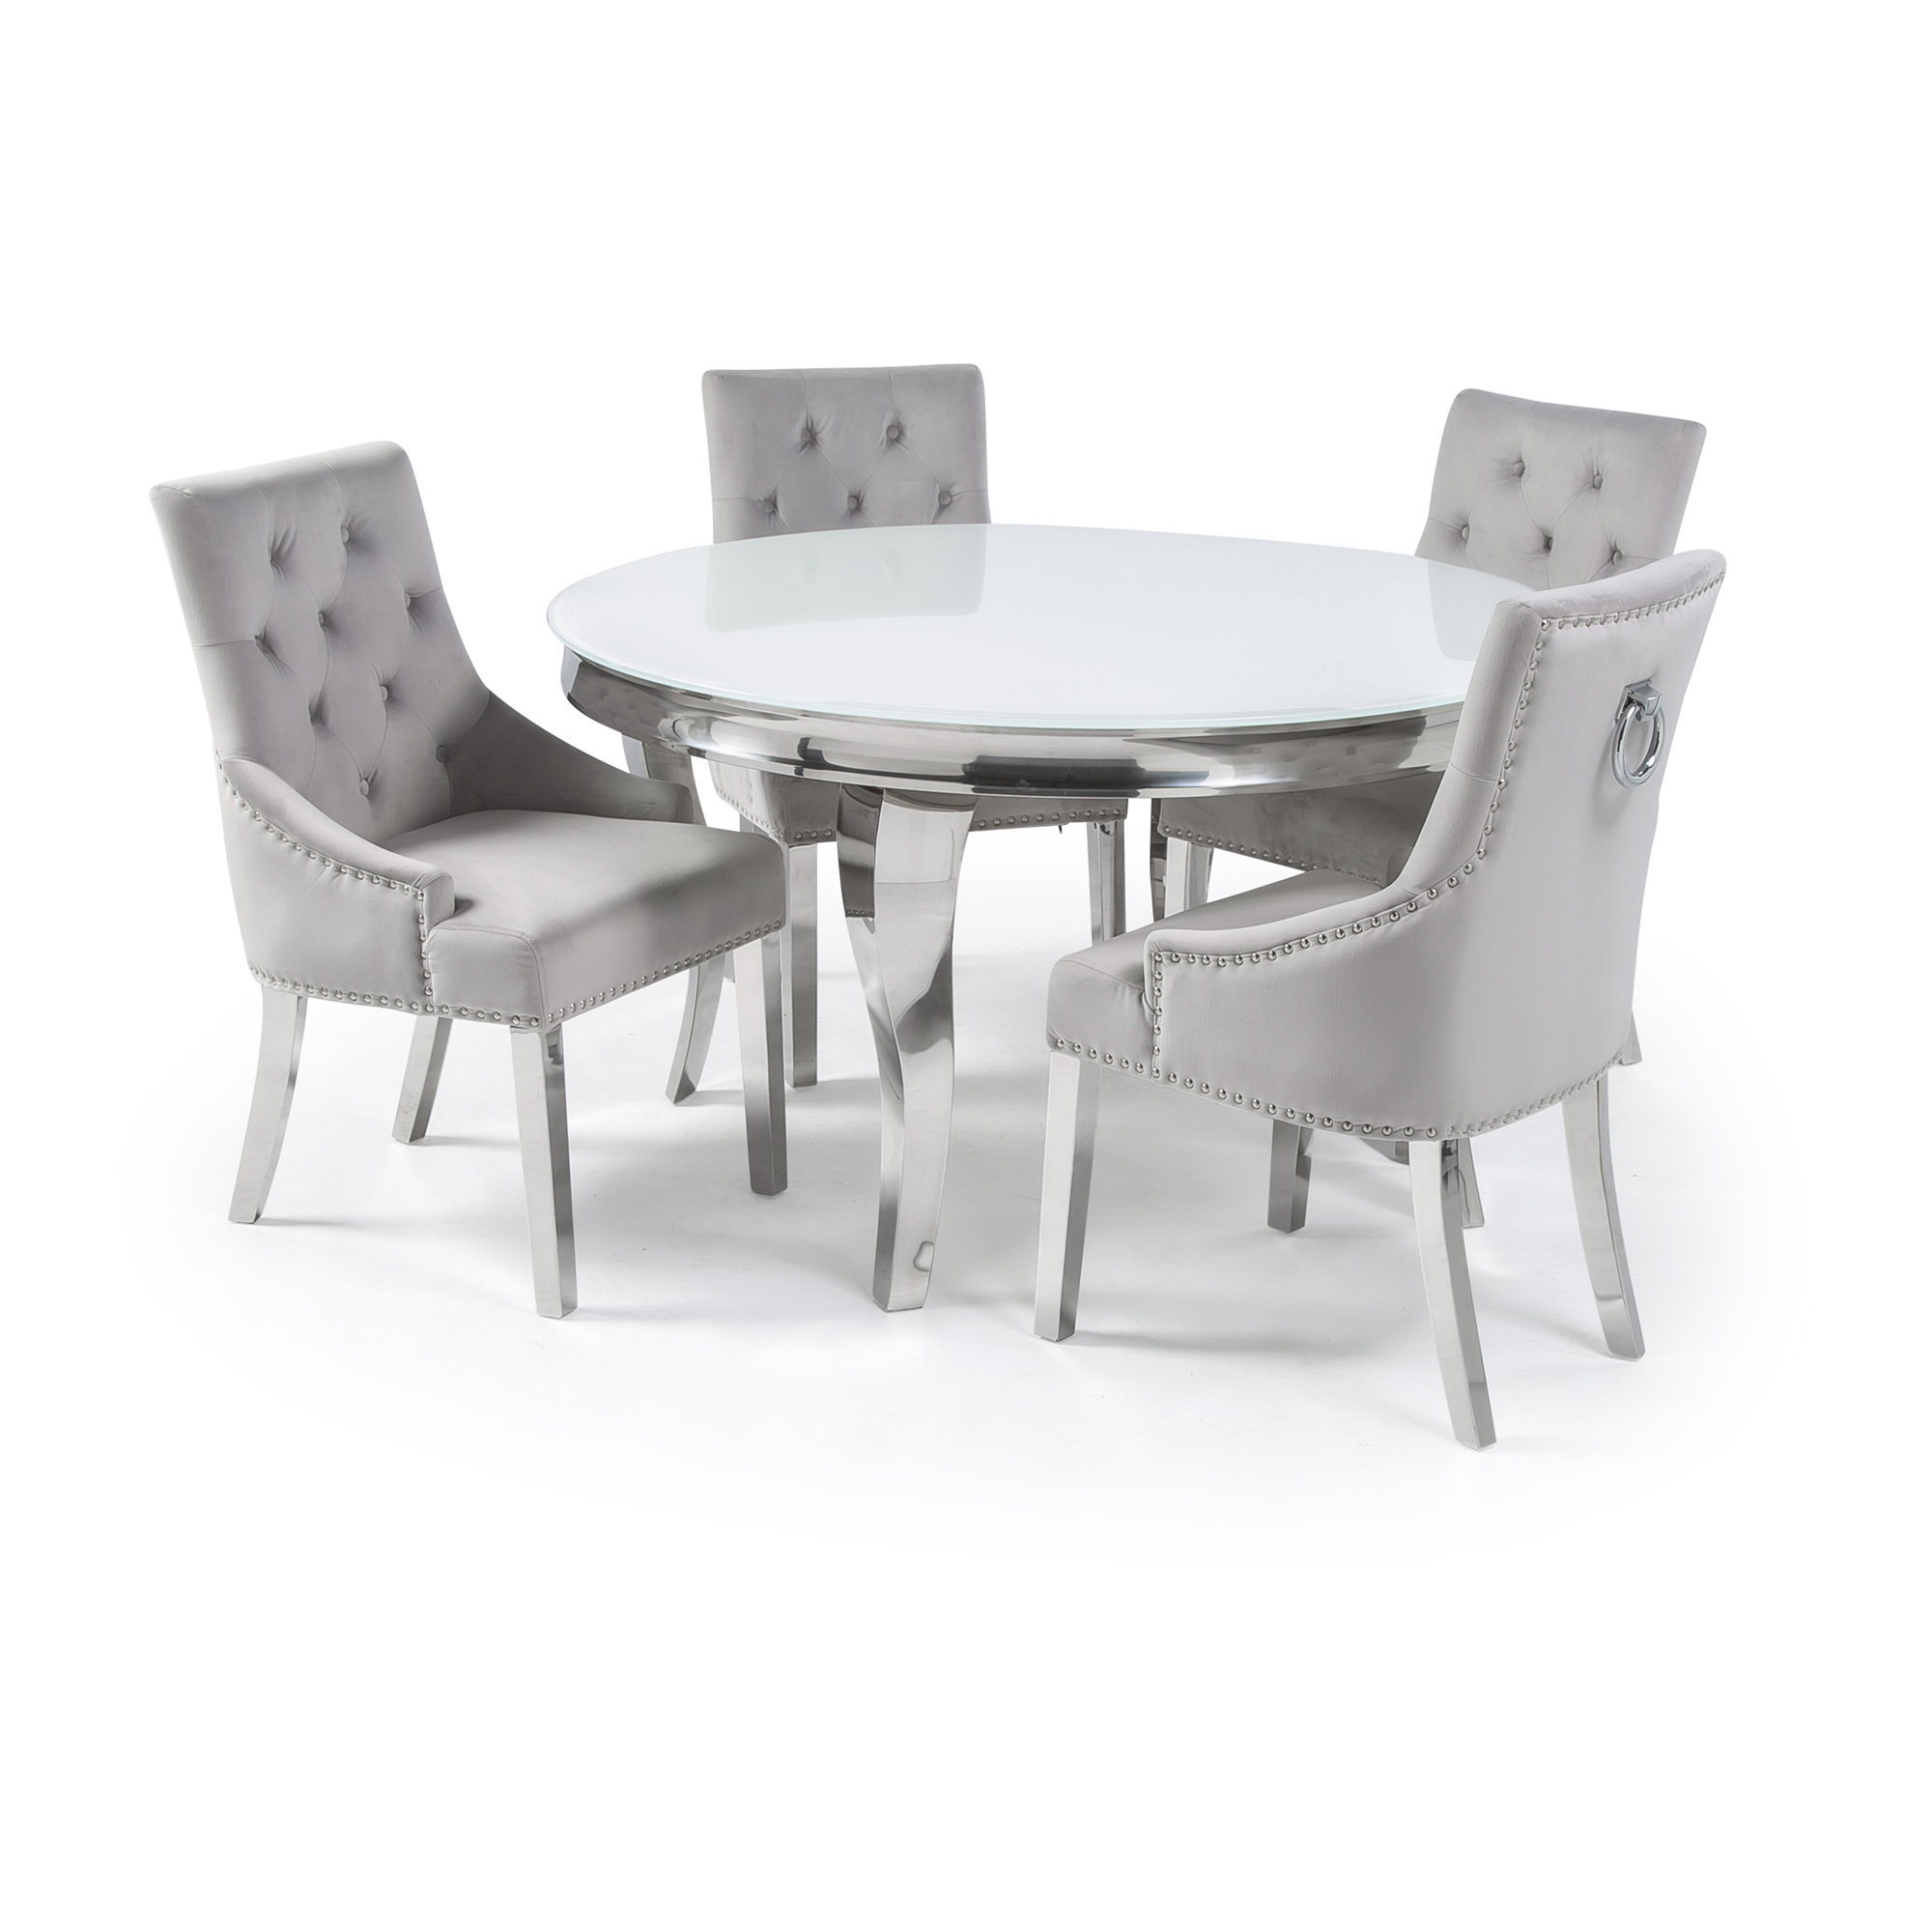 1.3m Circular Louis Polished Steel Dining White Glass Table Set with 4 Dove Grey Velvet Dining Chairs